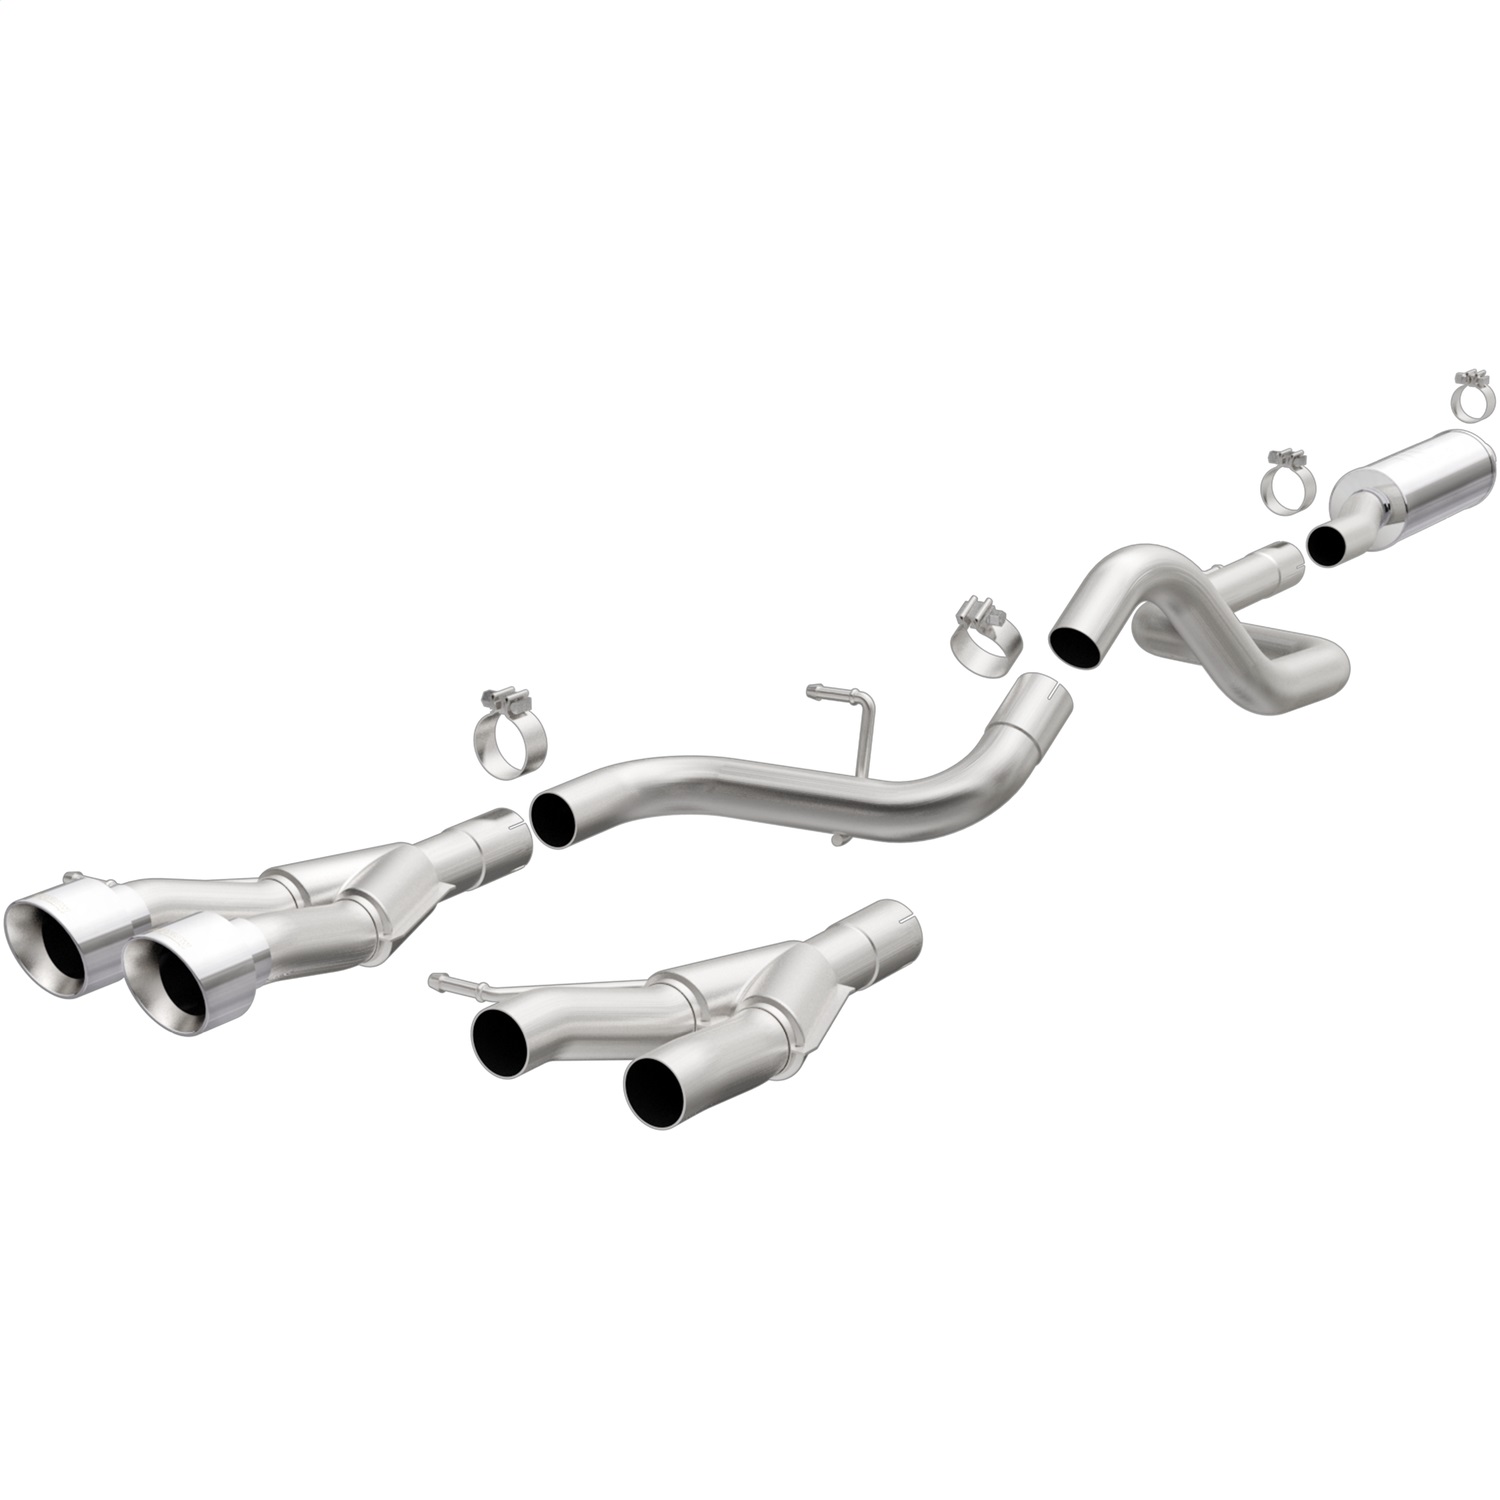 MagnaFlow Exhaust Products Magnaflow Performance Exhaust 19325 Exhaust System Kit